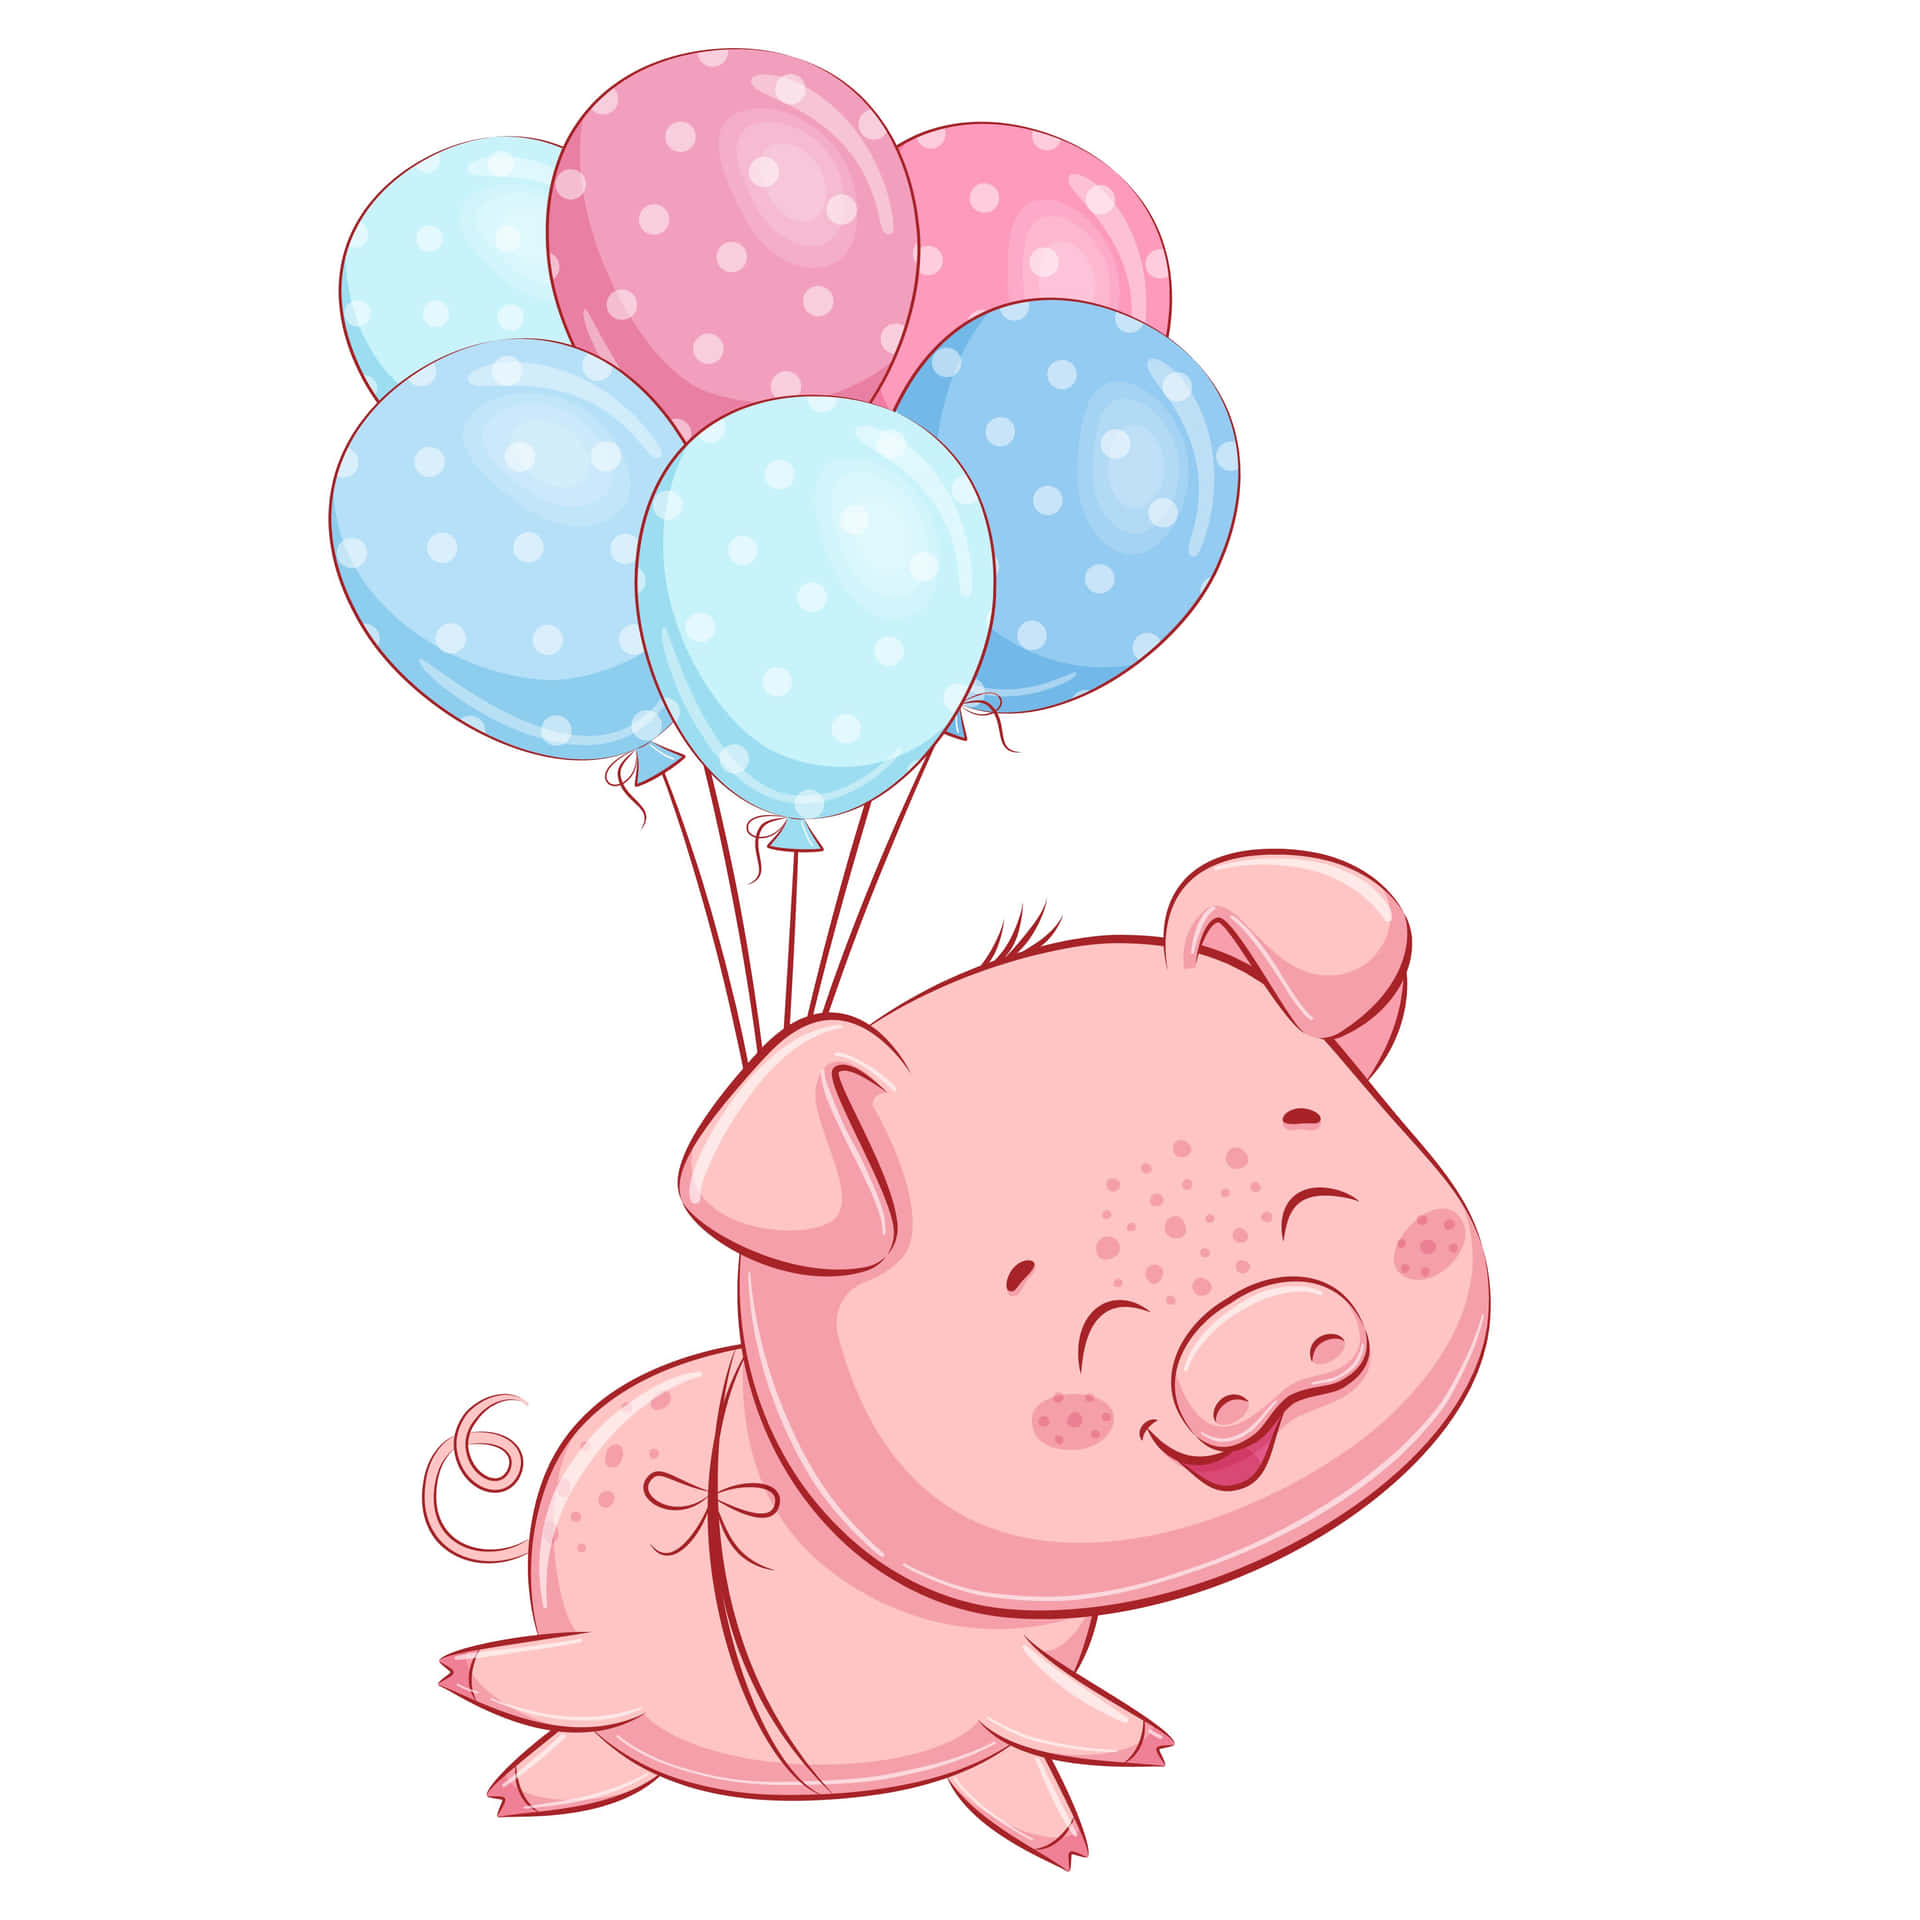 "Adorable Piggy Wiggy is ready for lots of love and snuggles!"